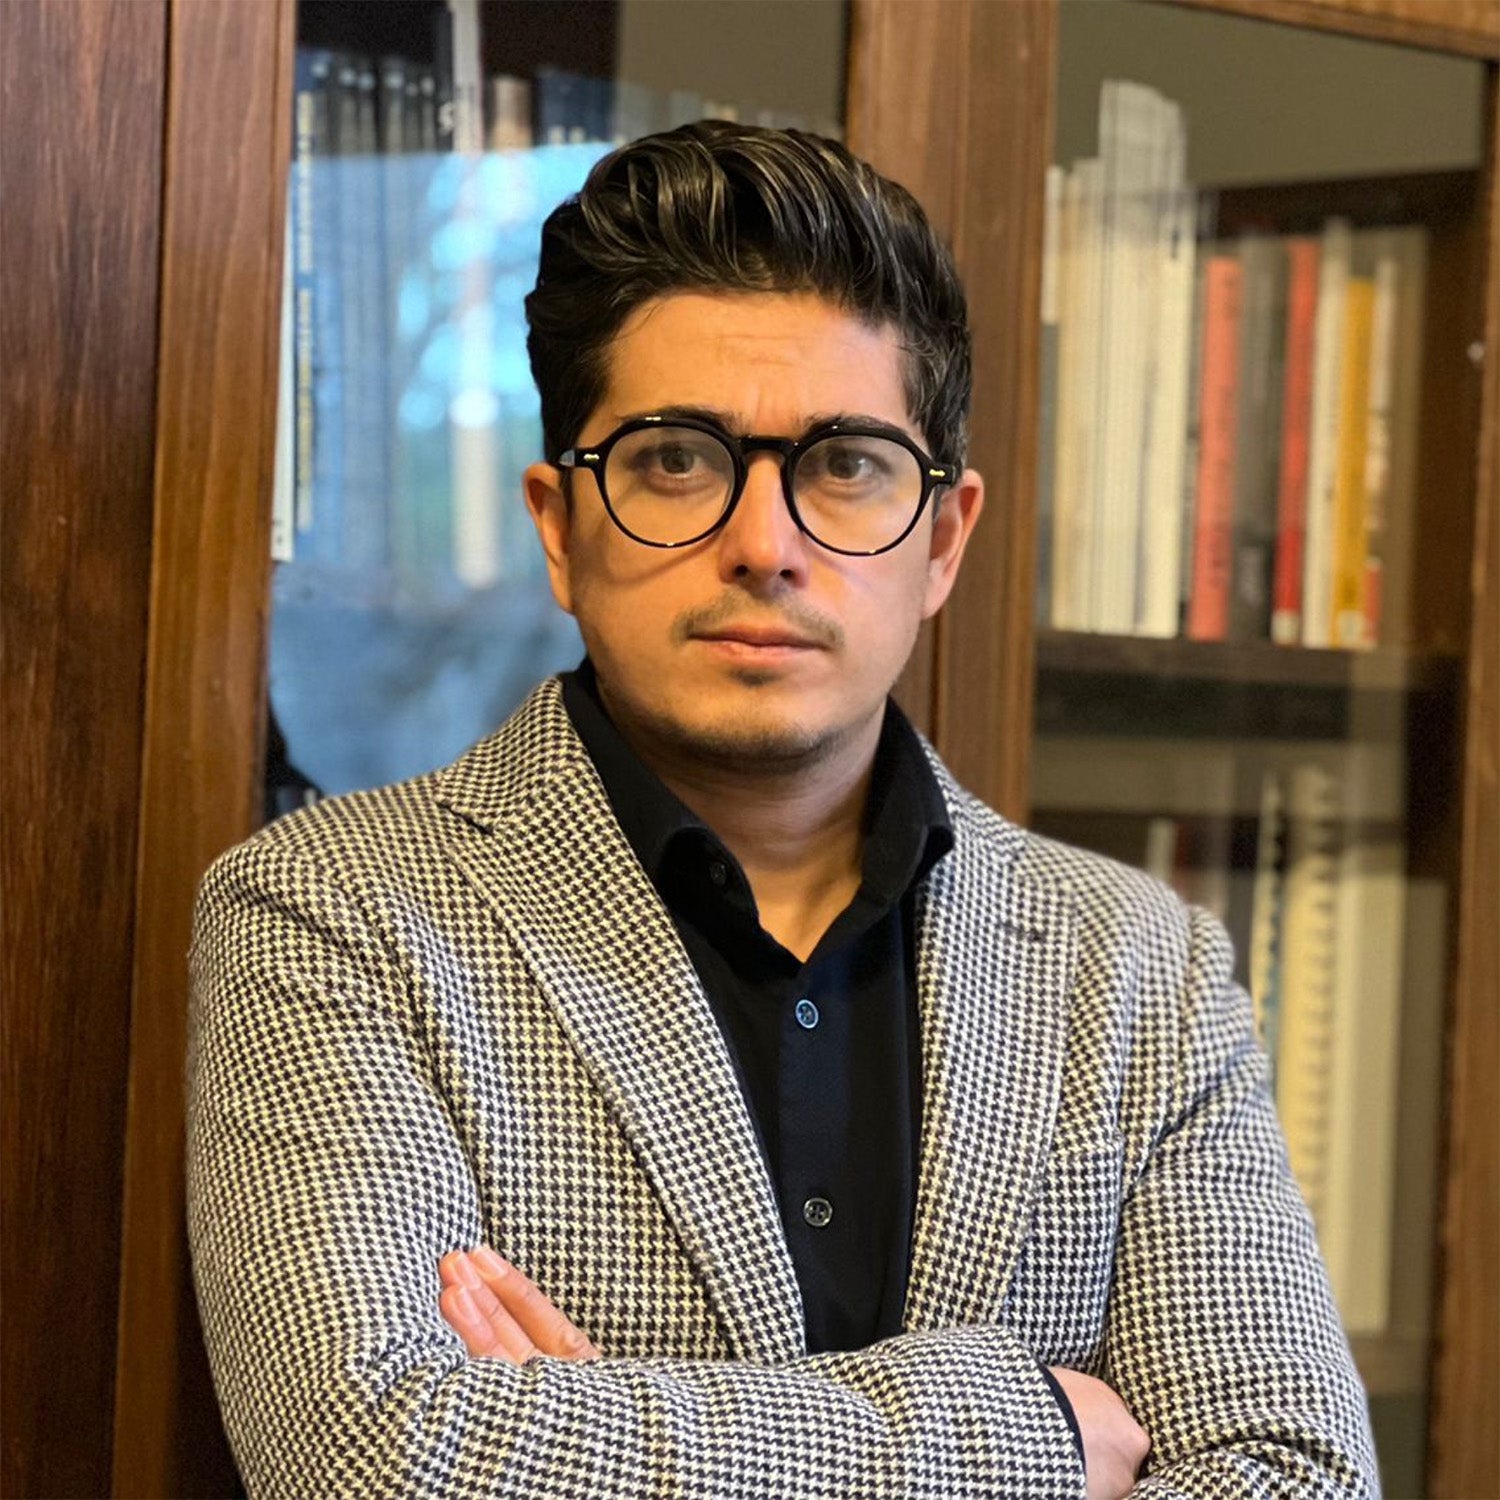 ROYBI Welcomes Dr. Izzet Darendeli To The Board Of Advisors For Global Expansion And Brand Positioning